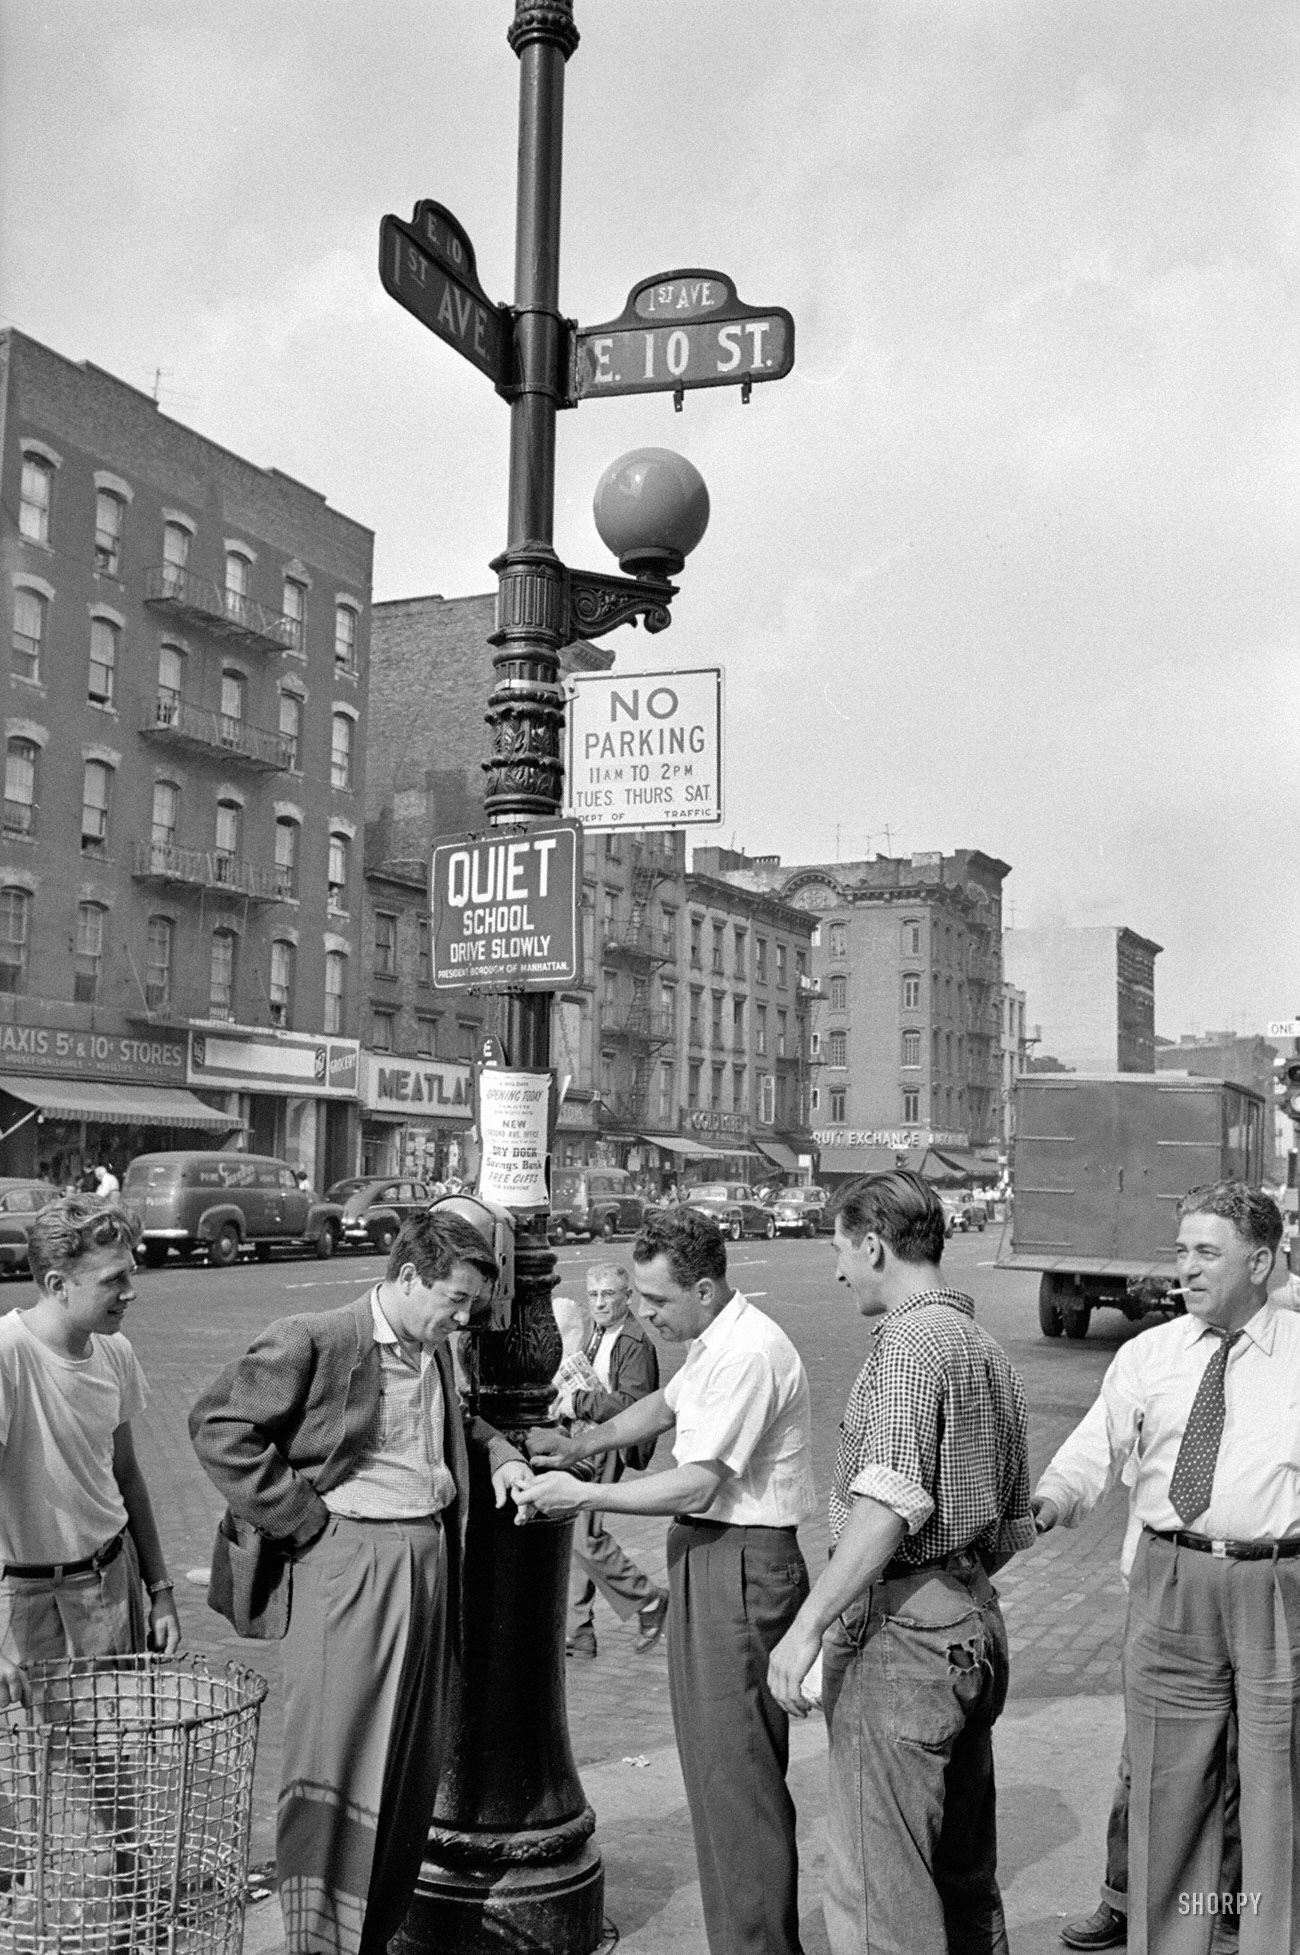 1954. "Boxer Rocky Graziano walking streets in New York with local boys." From photos for the Look magazine article "The Fight of My Life." View full size.